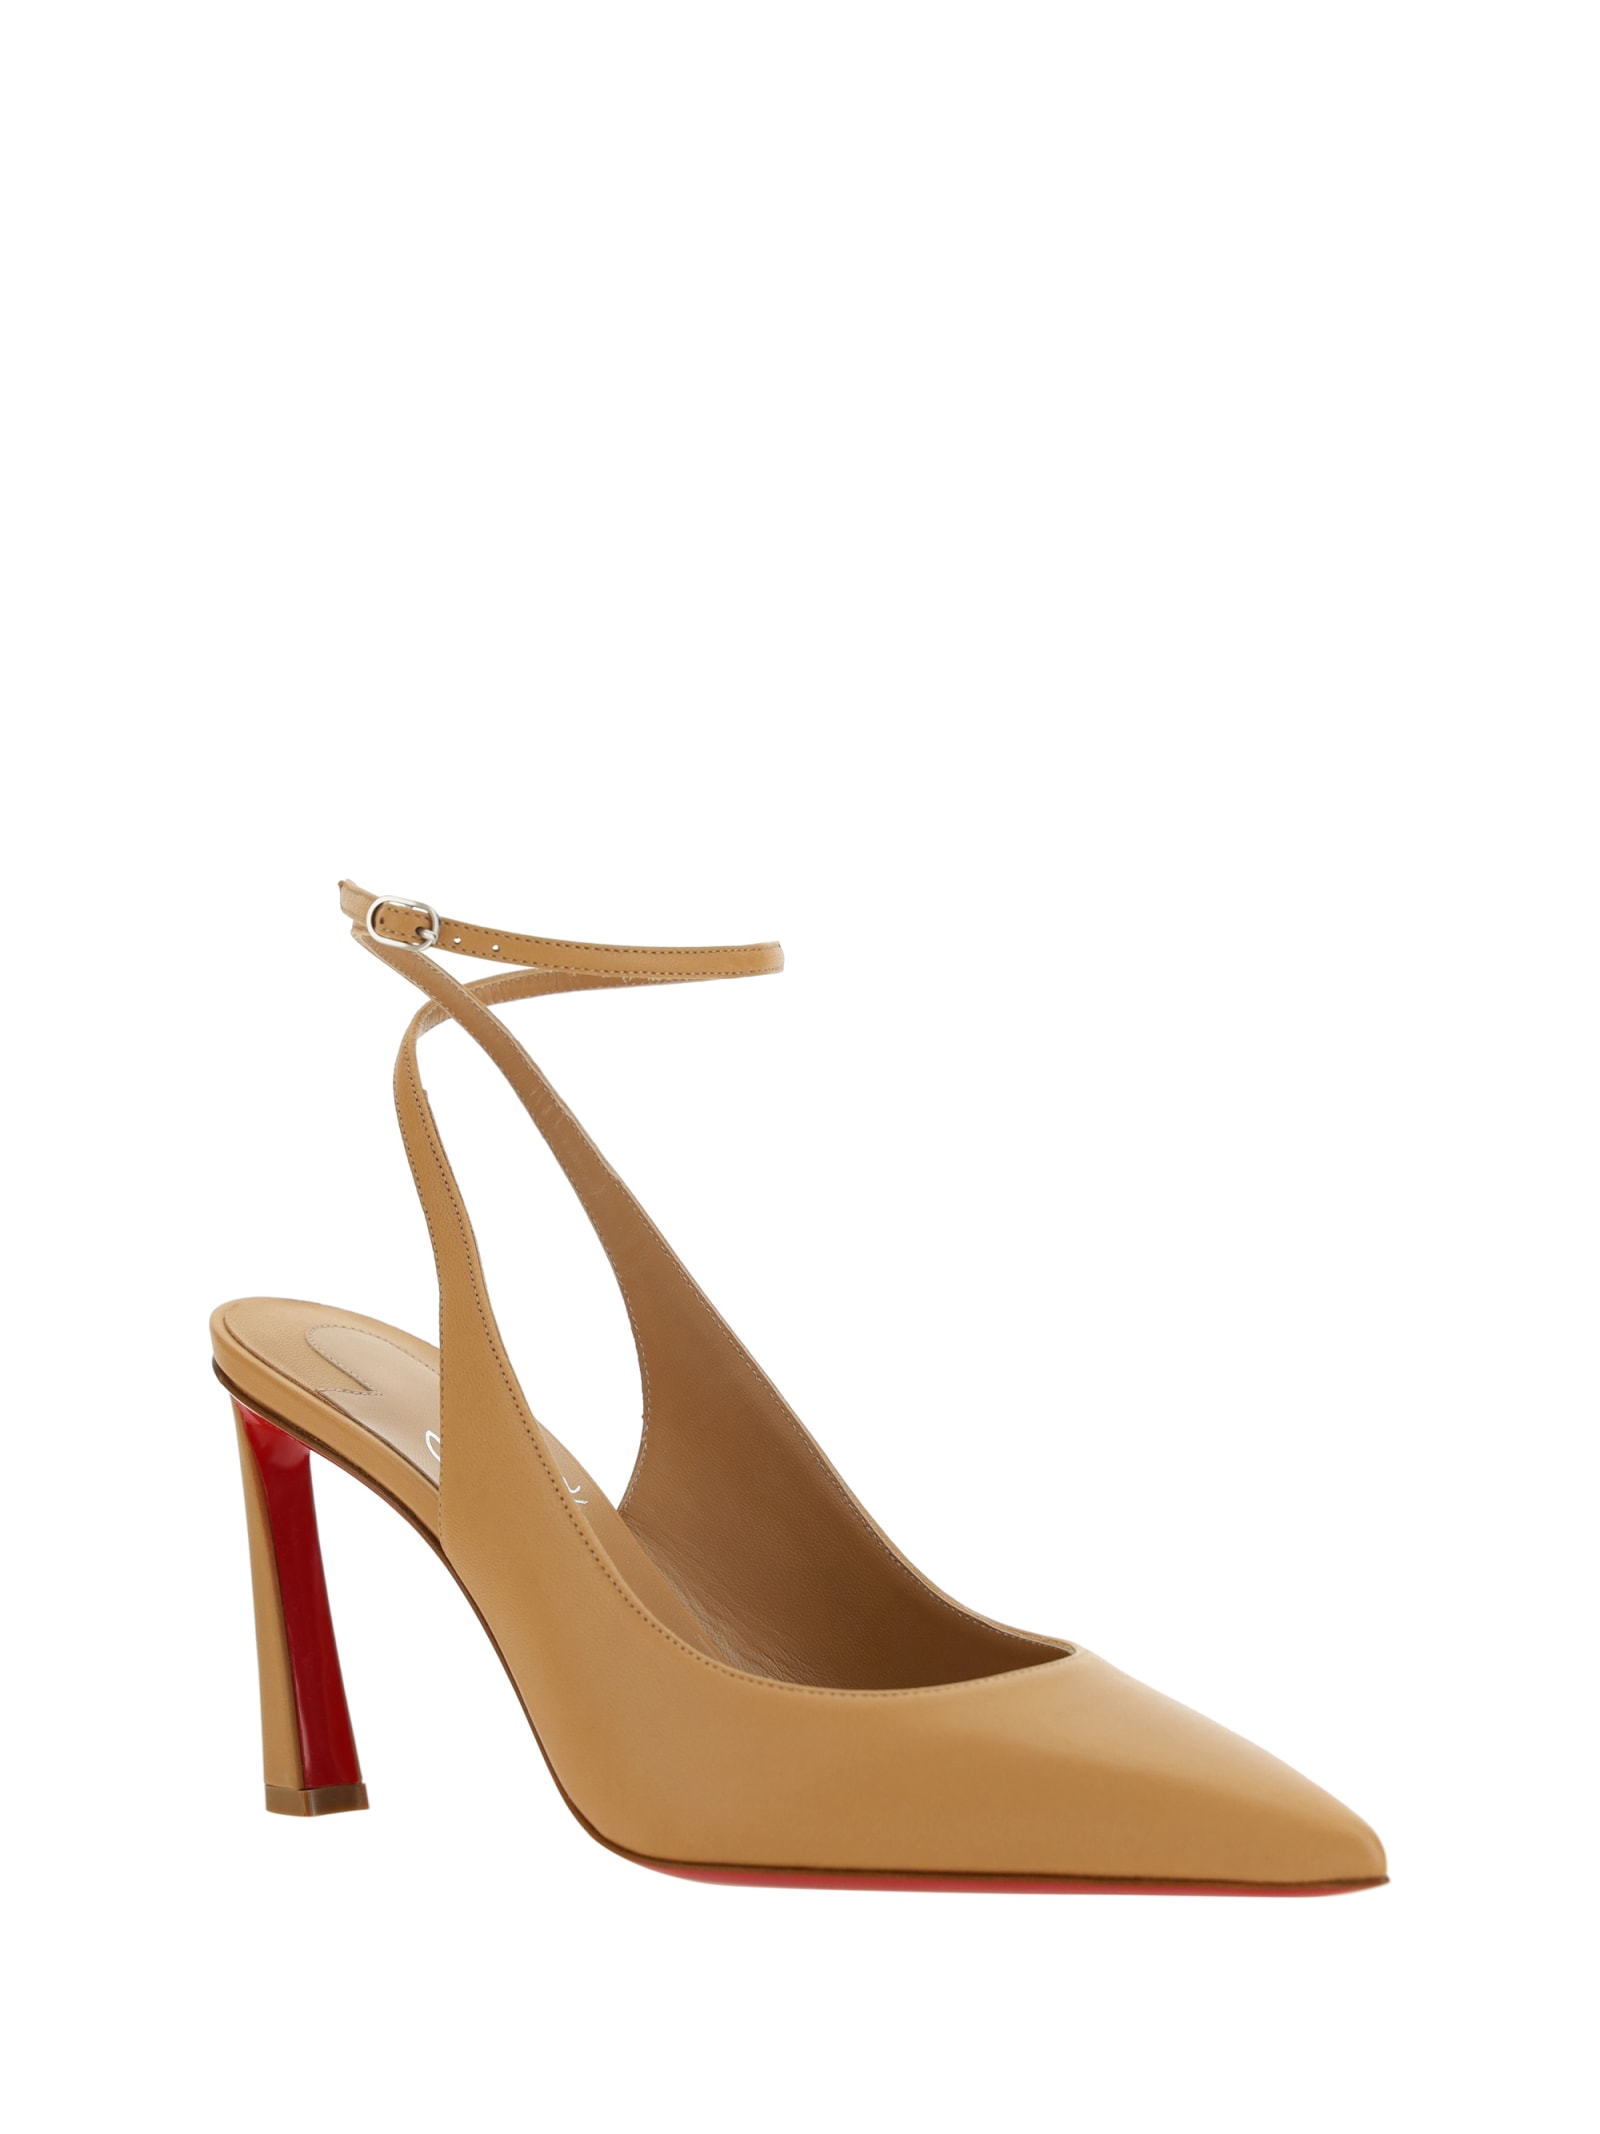 Shop Christian Louboutin Condora Strap Pumps In Toffee/lin Toffee